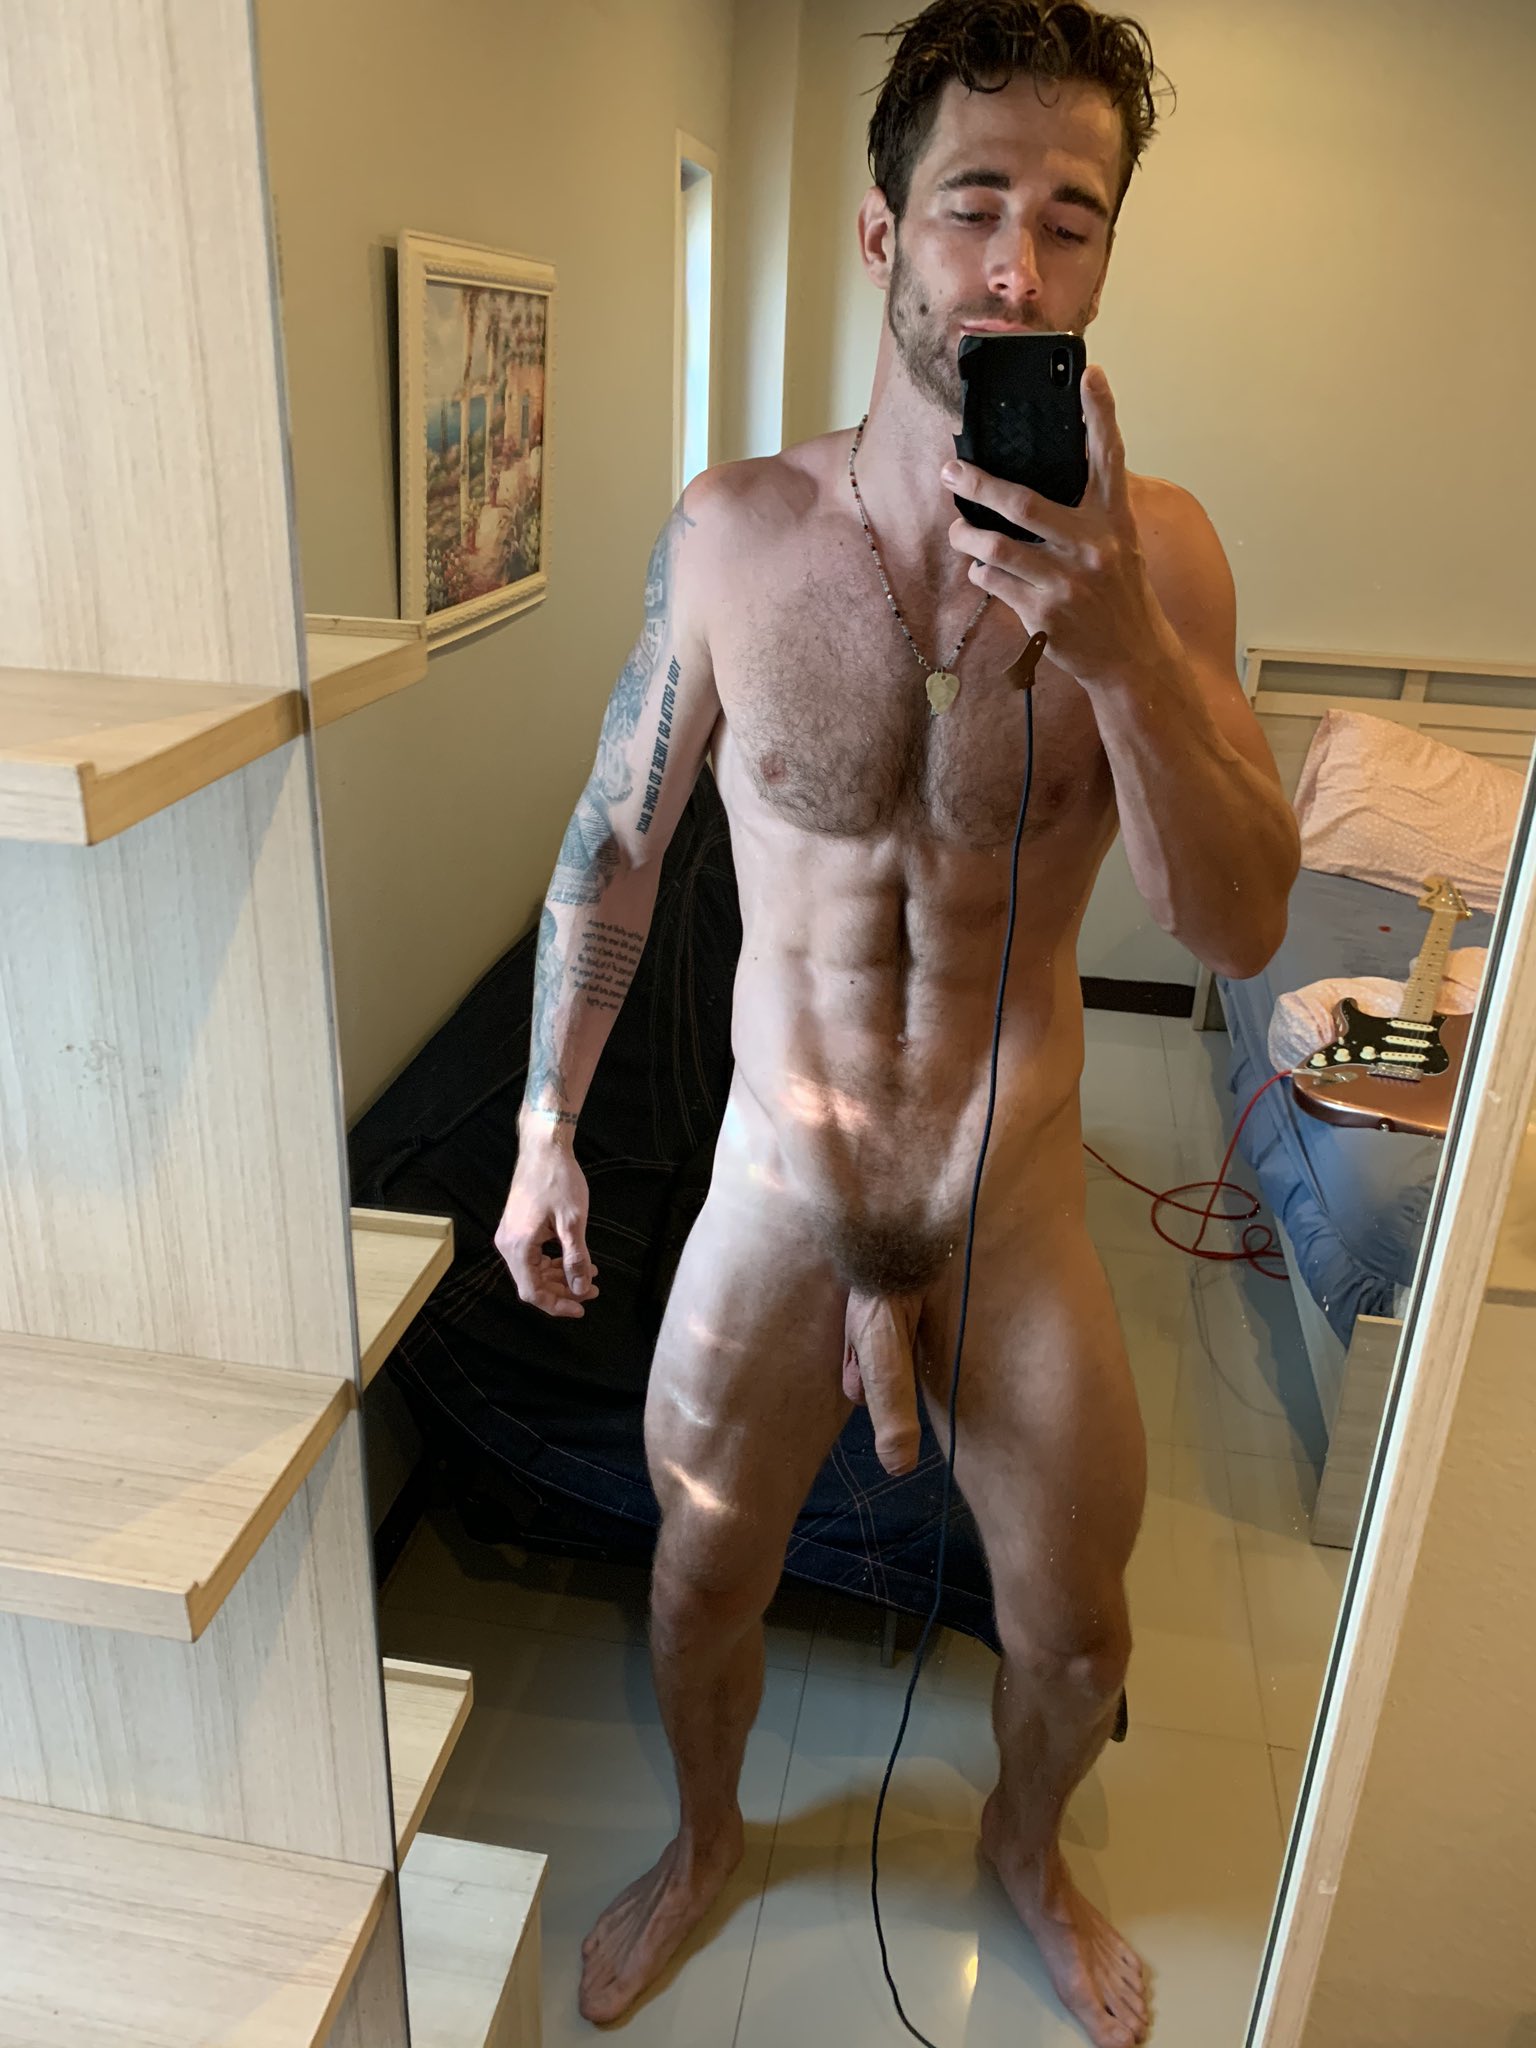 Best onlyfans dick ratings